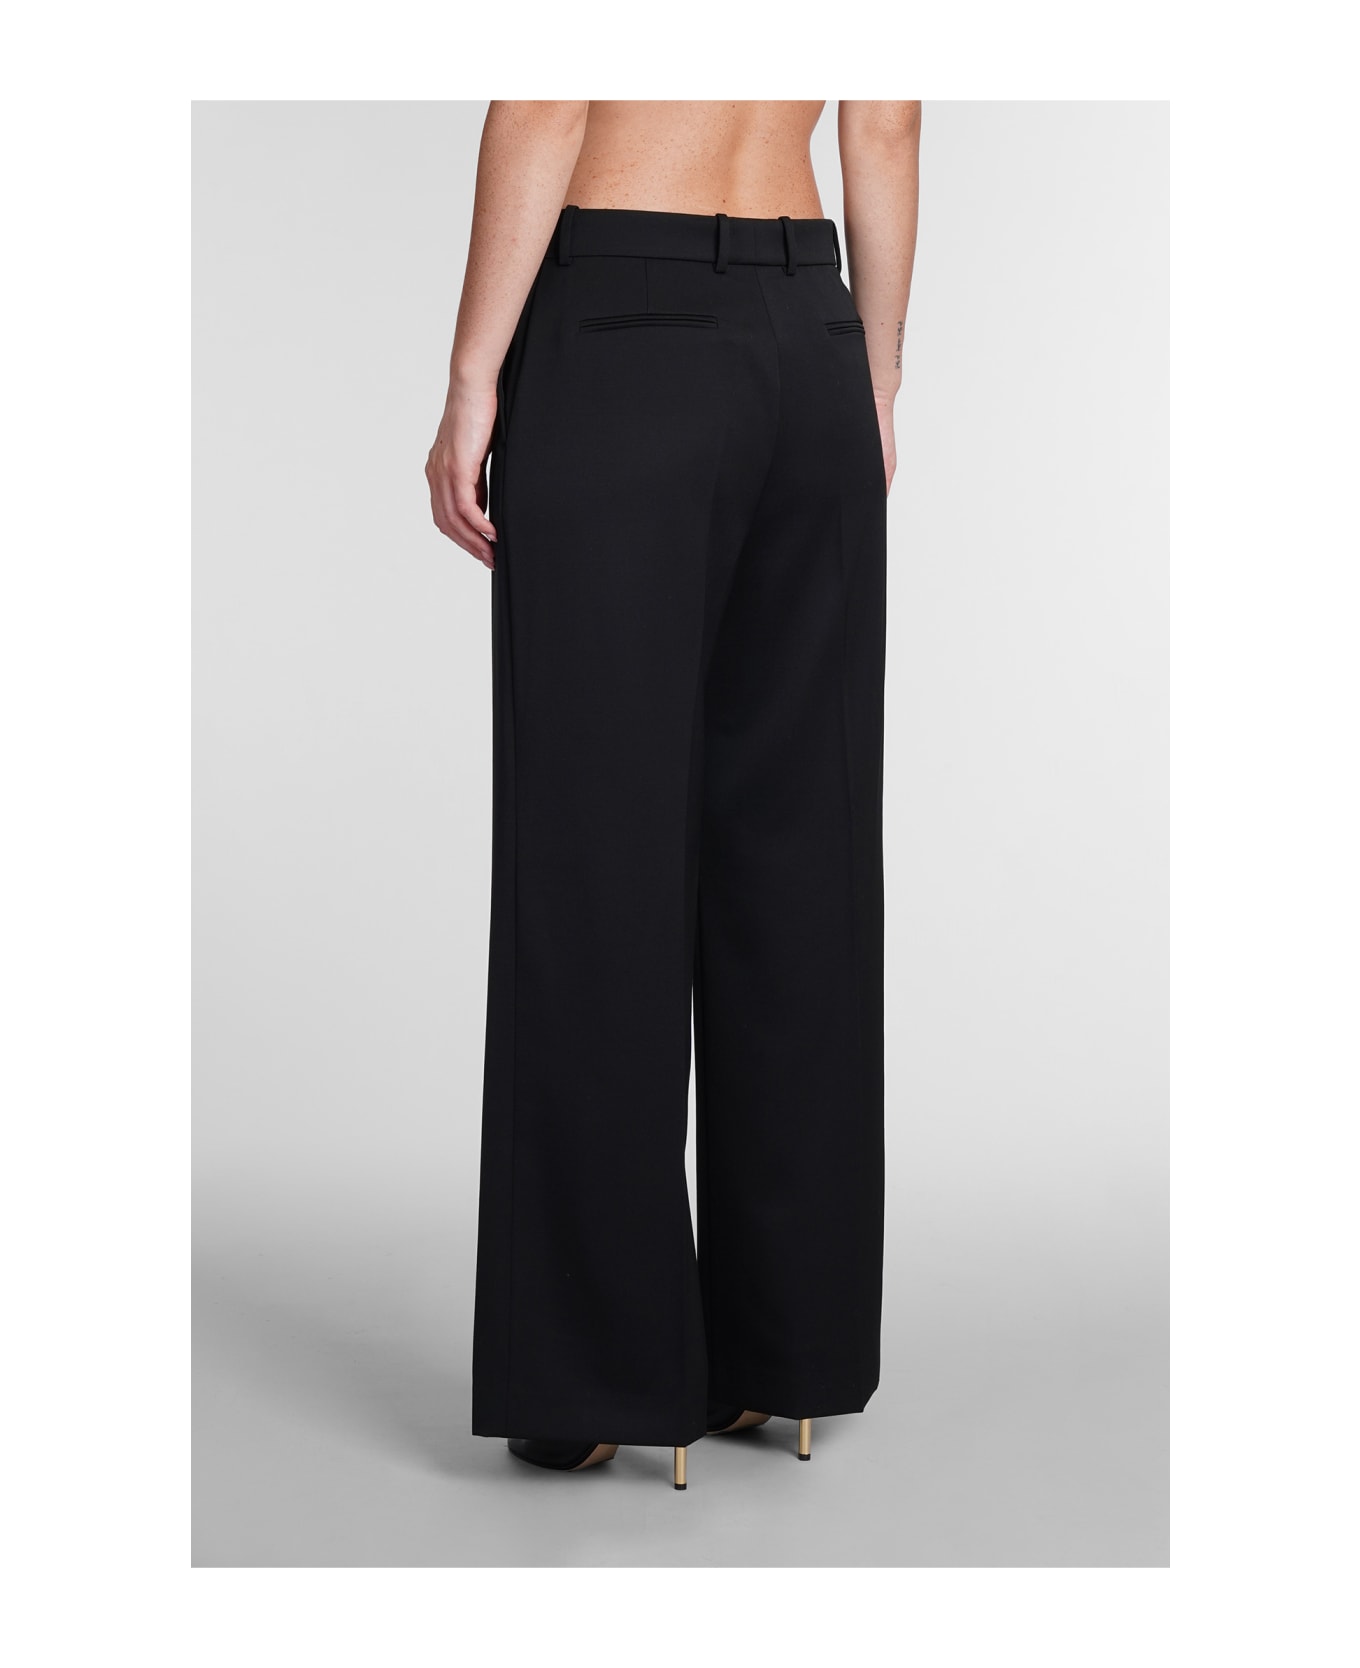 Lanvin High-waisted Wool Trousers - Black ボトムス